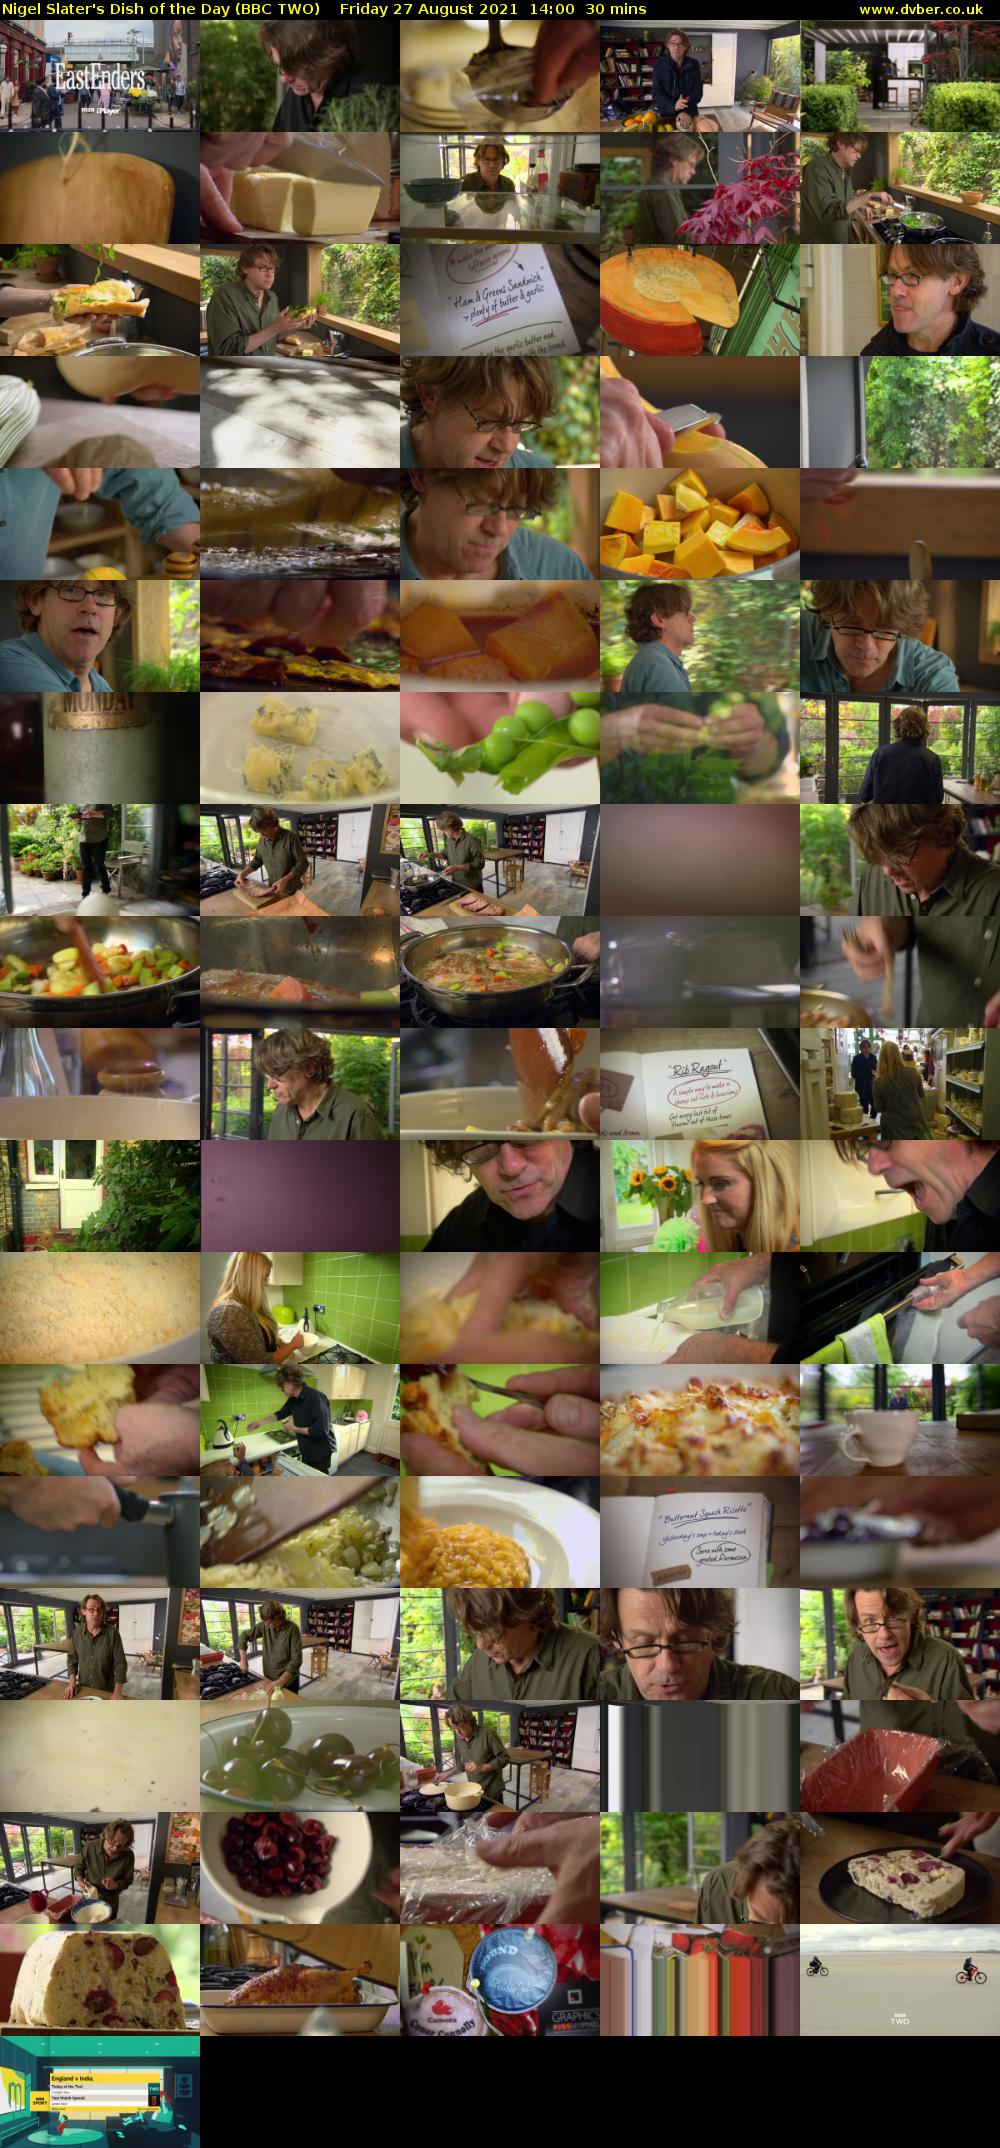 Nigel Slater's Dish of the Day (BBC TWO) Friday 27 August 2021 14:00 - 14:30